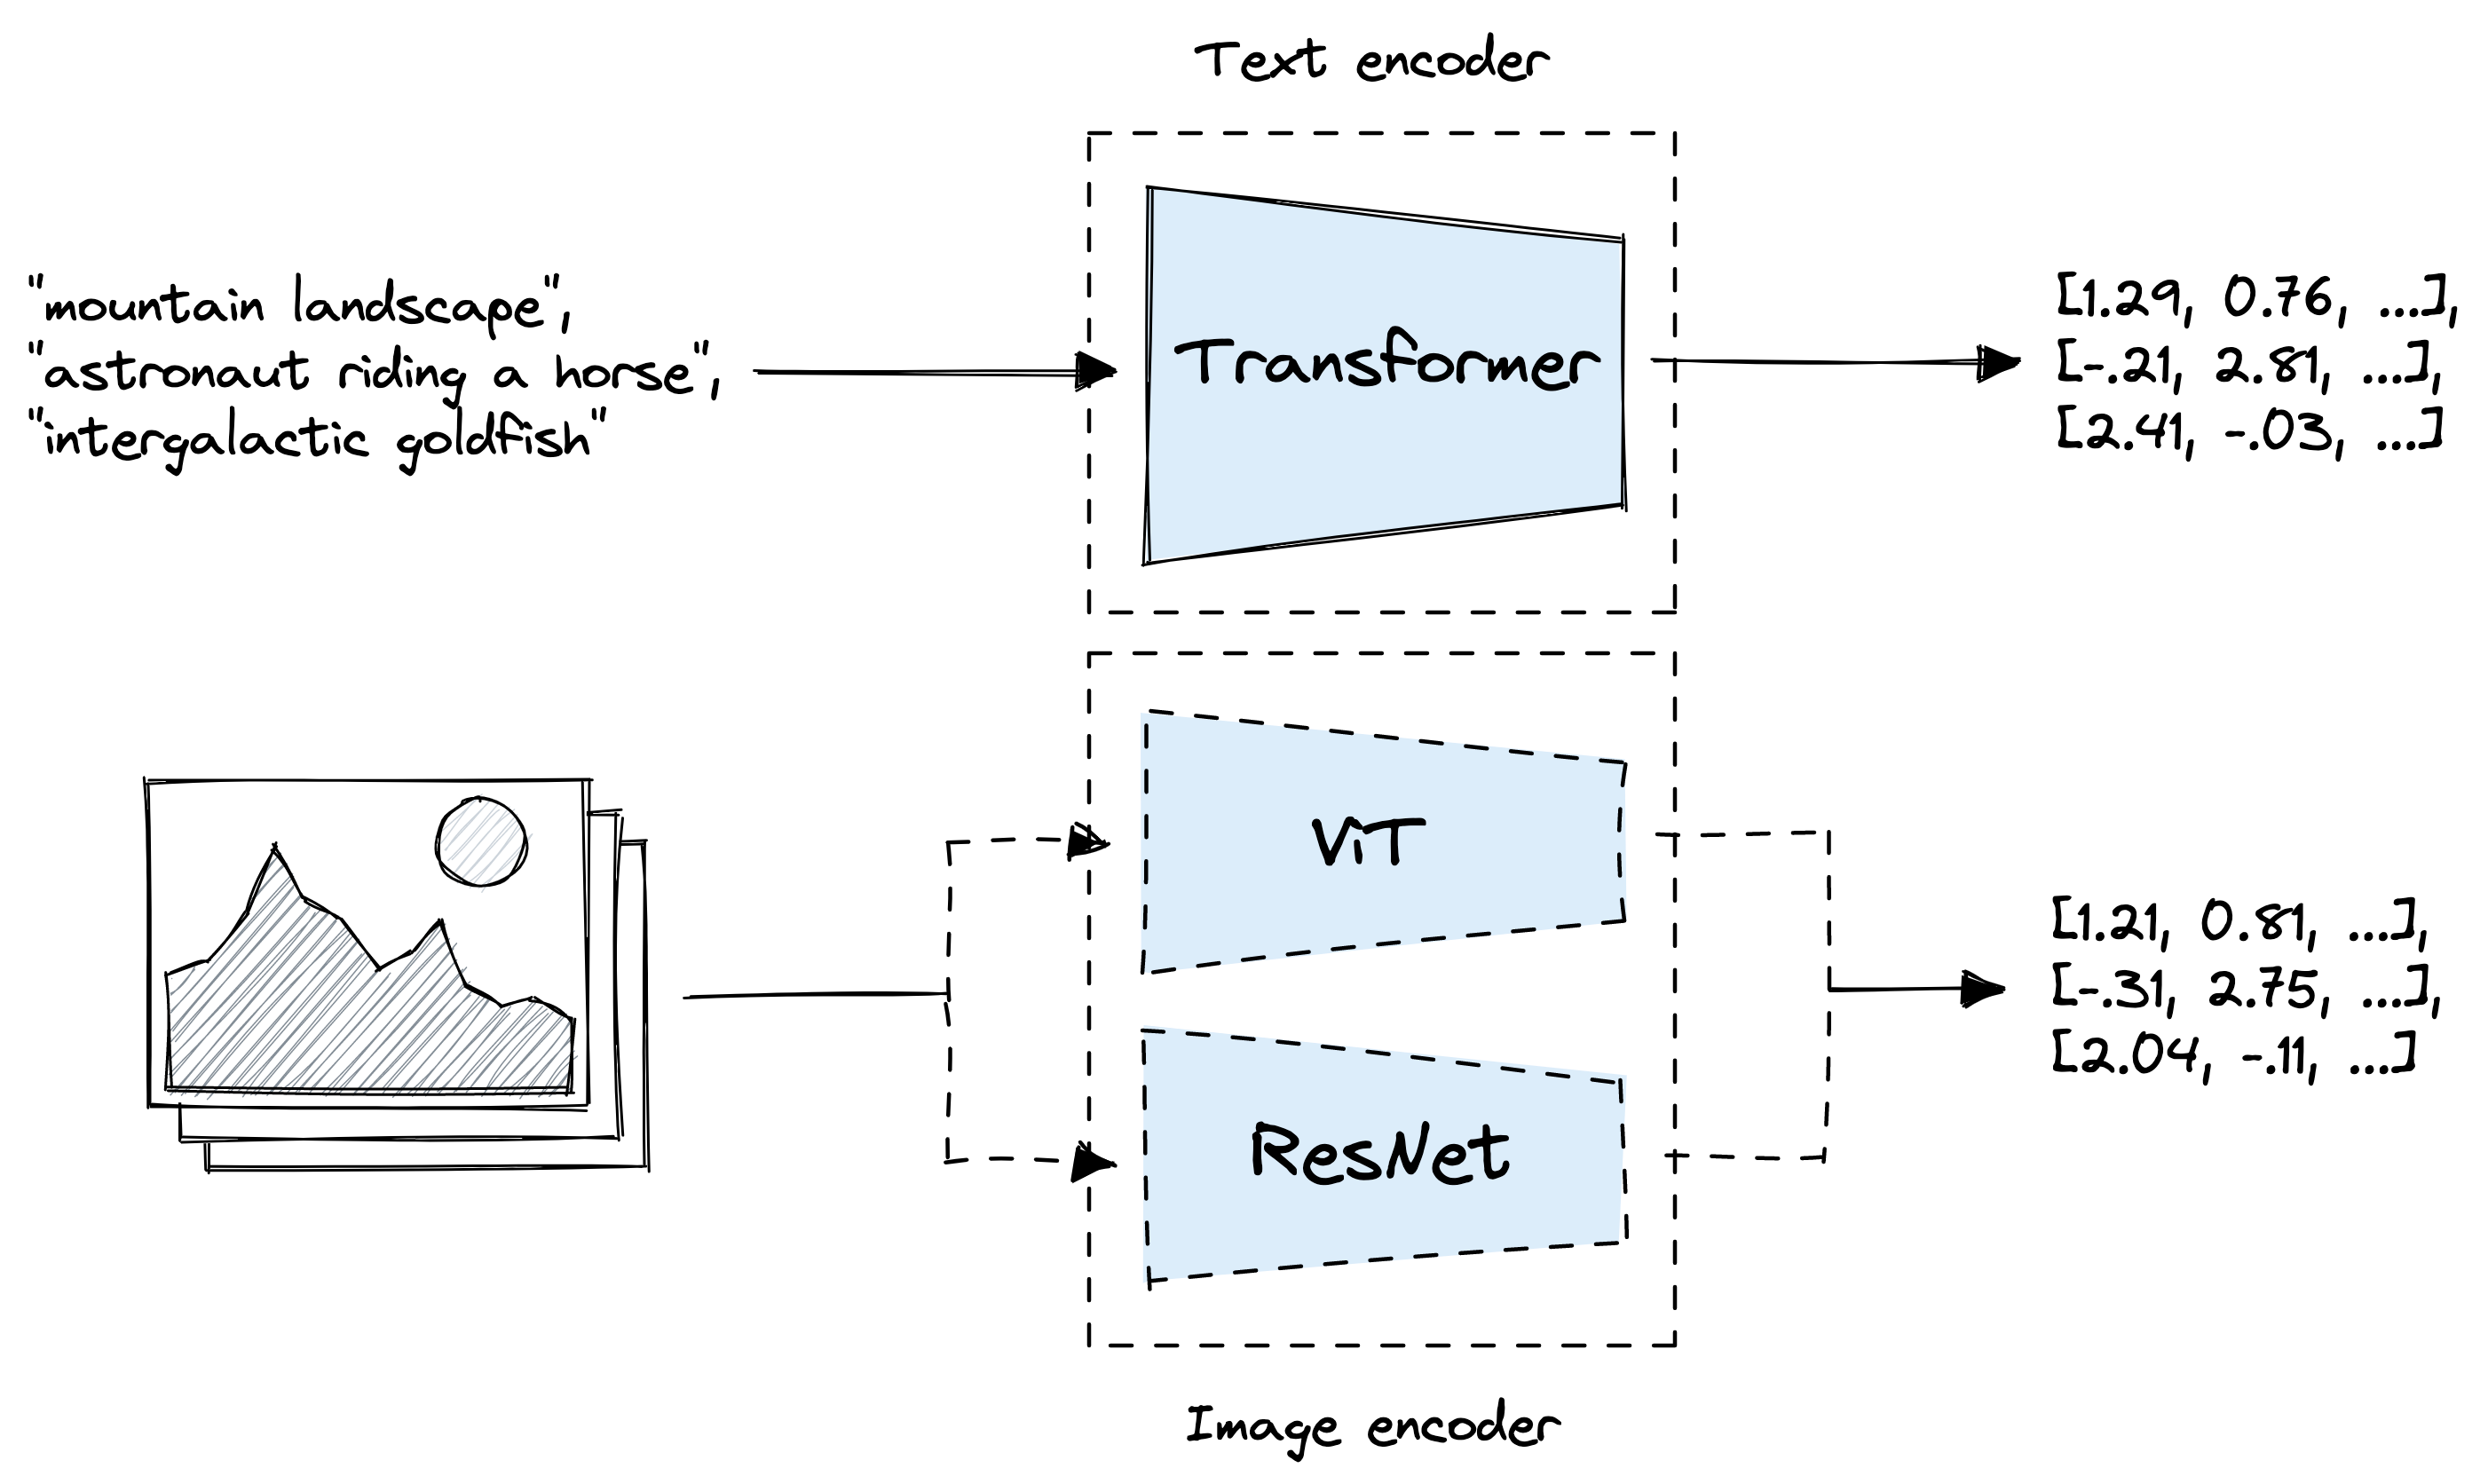 Architecture diagram of CLIP with the text encoder and ViT or ResNet as the image encoder.